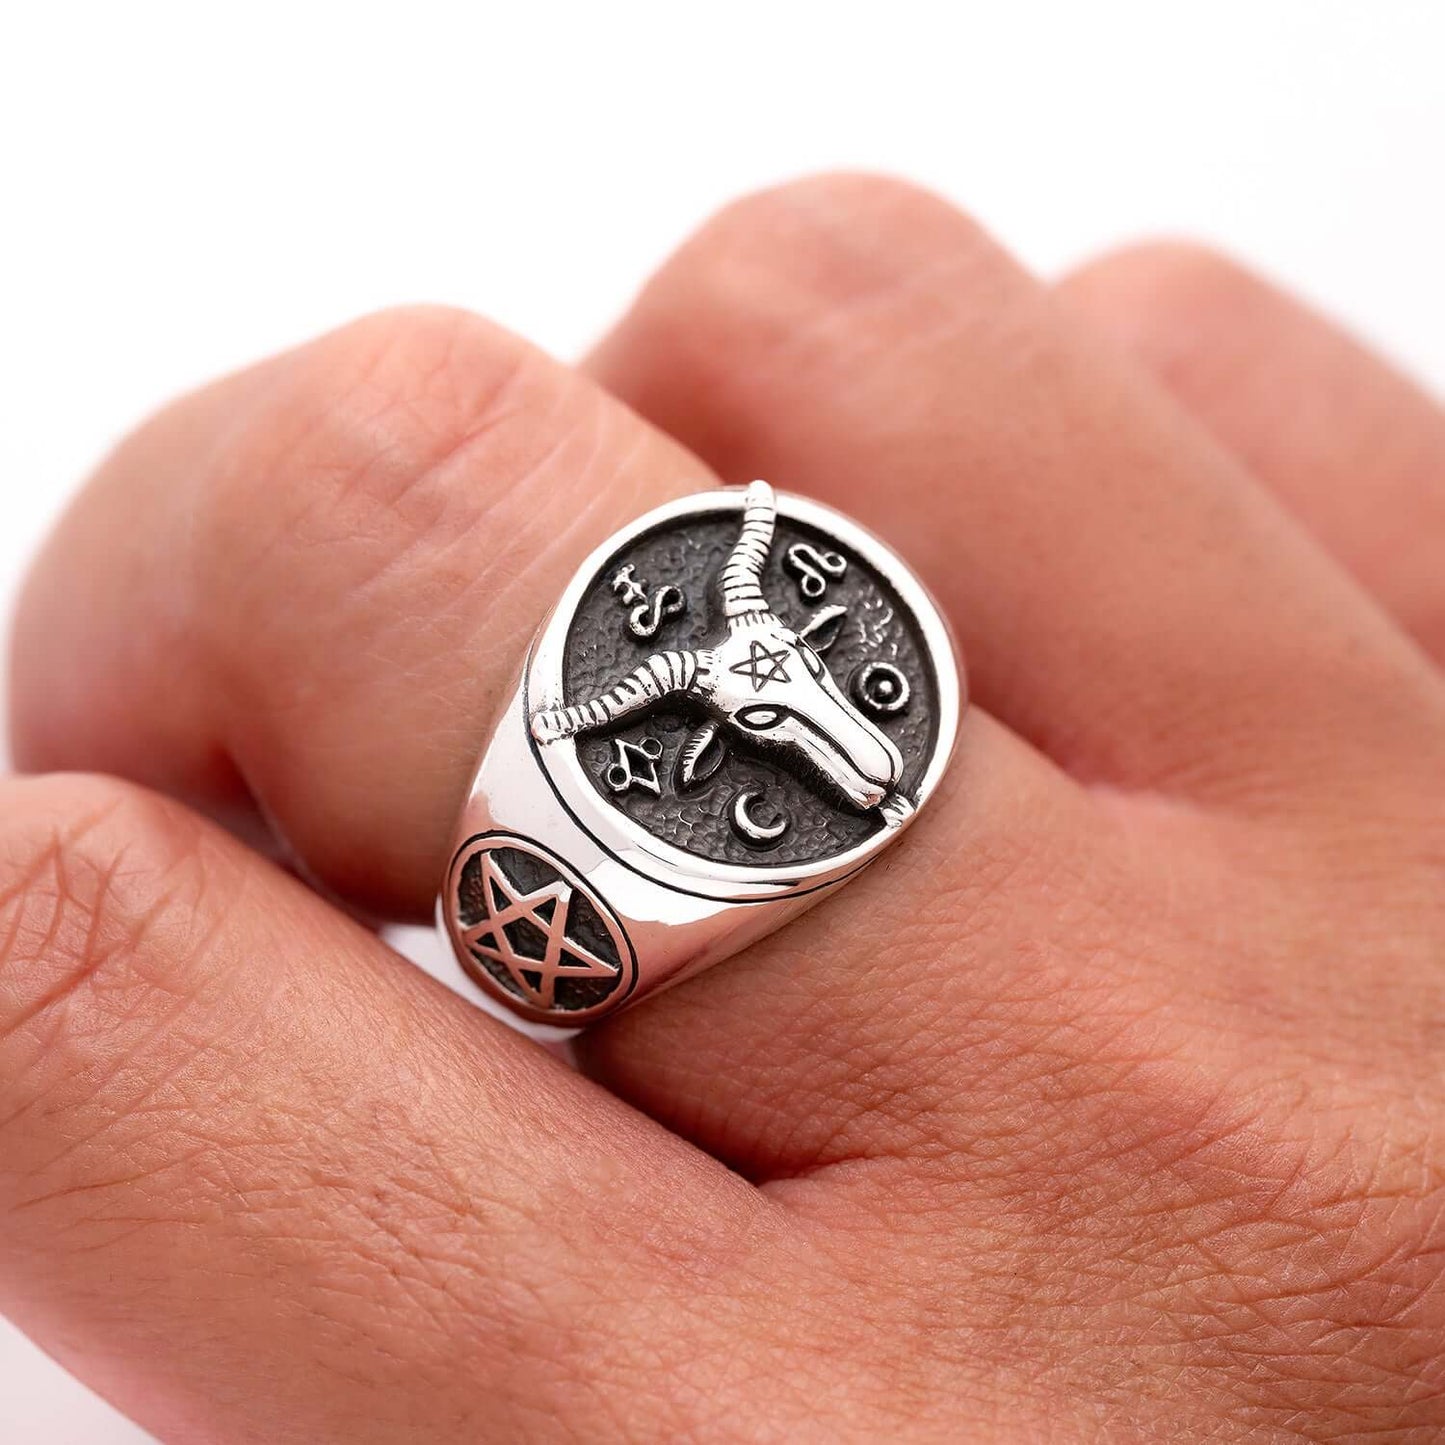 925 Sterling Silver Goat of Mendes Ring with Pentagram - SilverMania925